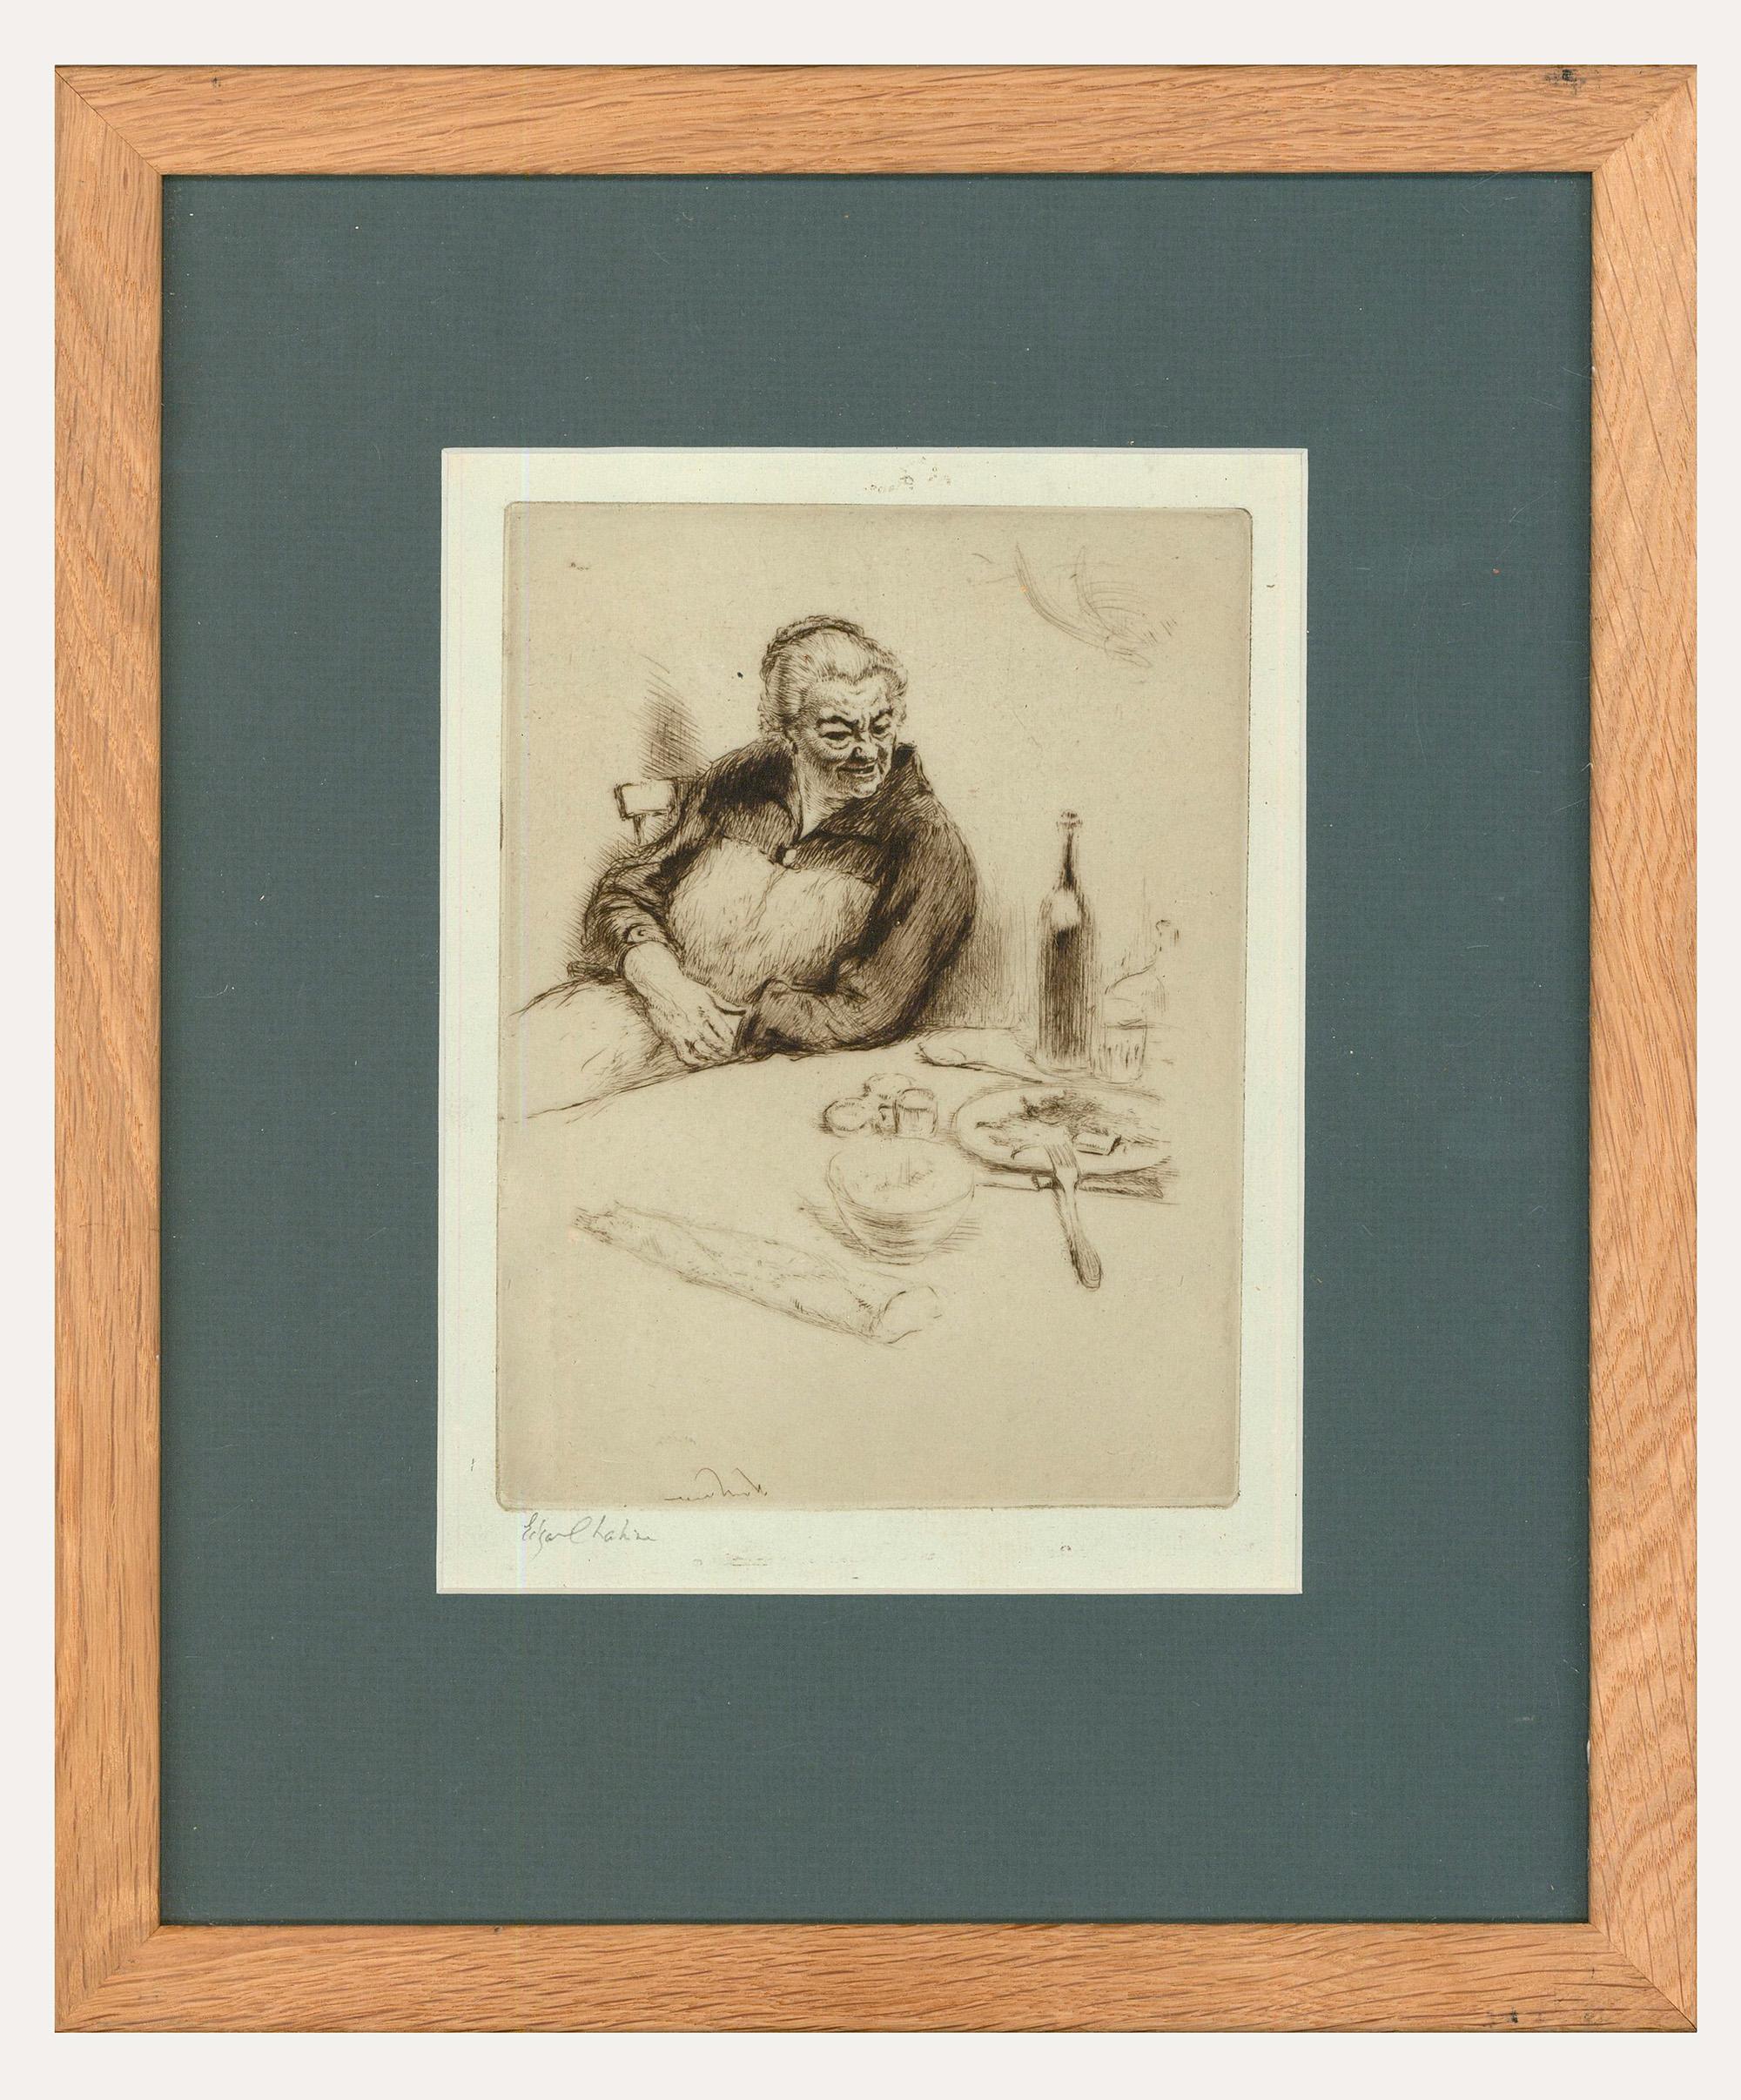 A crisp etching of a french women seated at the supper table. Chahine has captured the figure with a disgruntled expression, staring down at a half eaten plate of food. The thought provoking scene has been signed in pencil below plate lines.